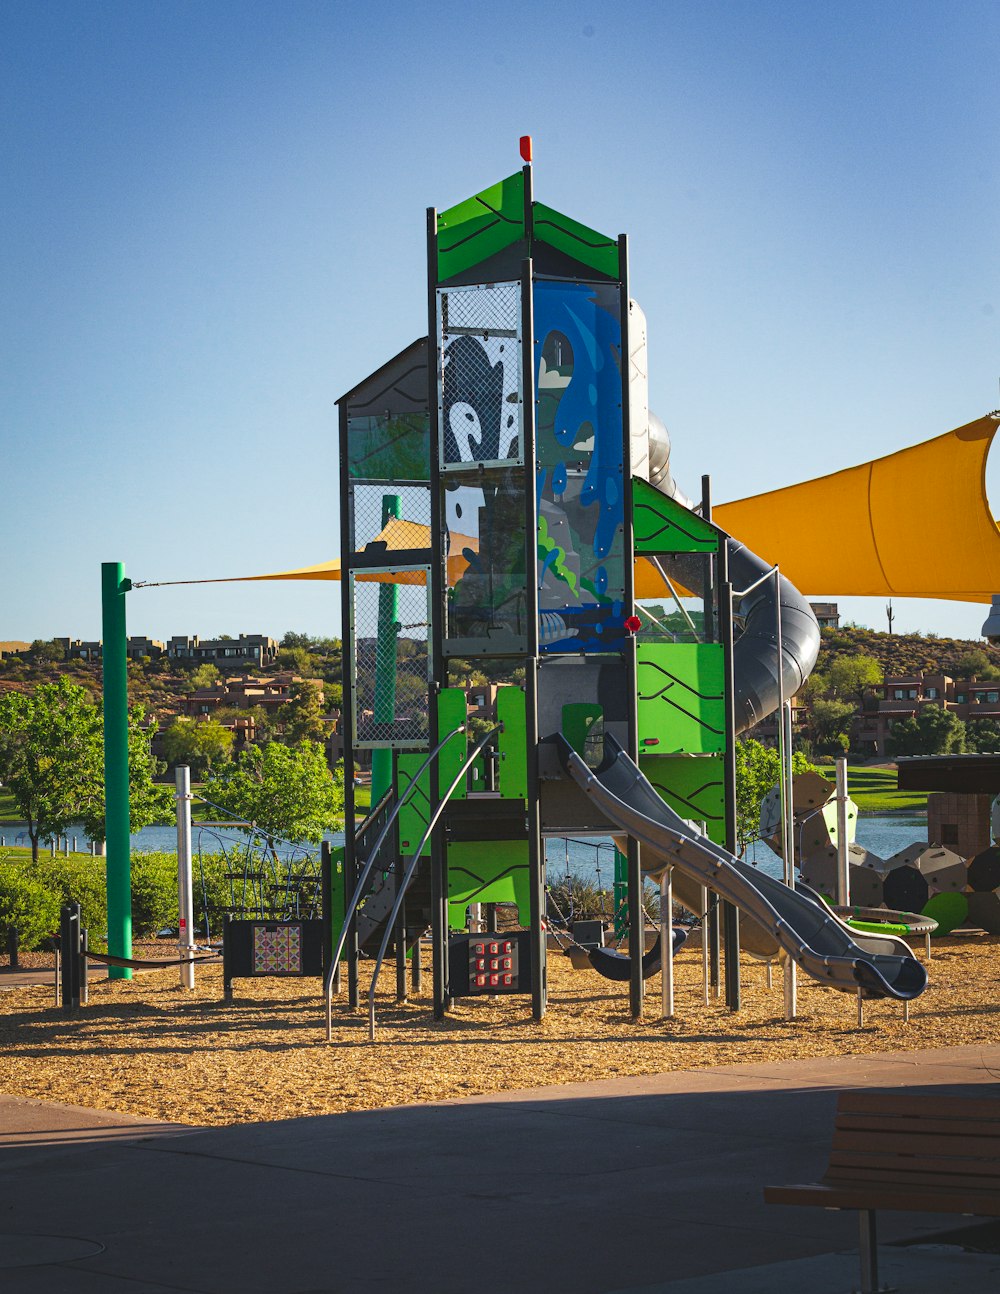 a children's play structure with a slide in the background